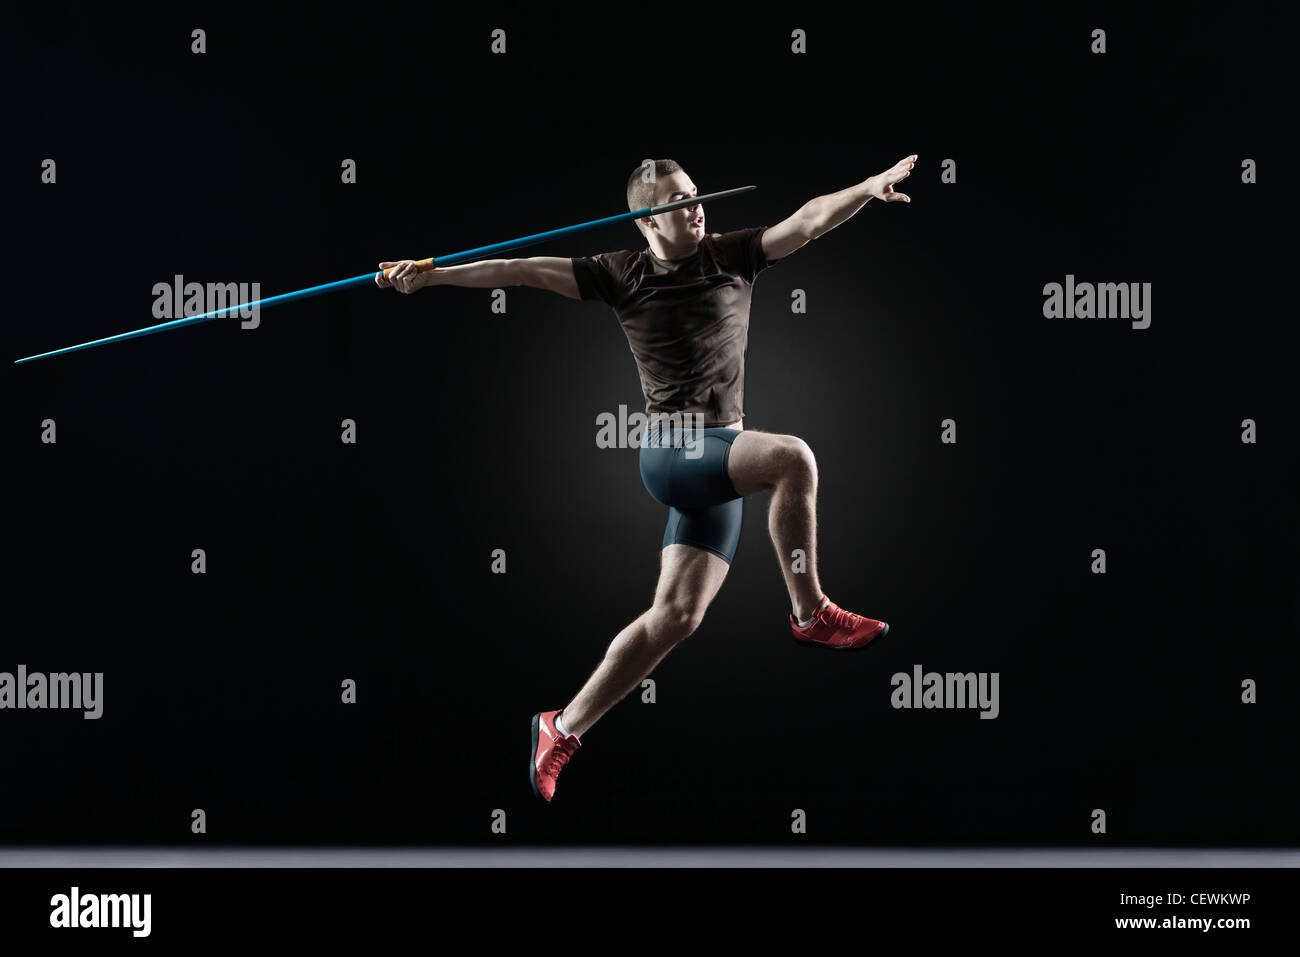 Male athlete leaping with javelin Stock Photo